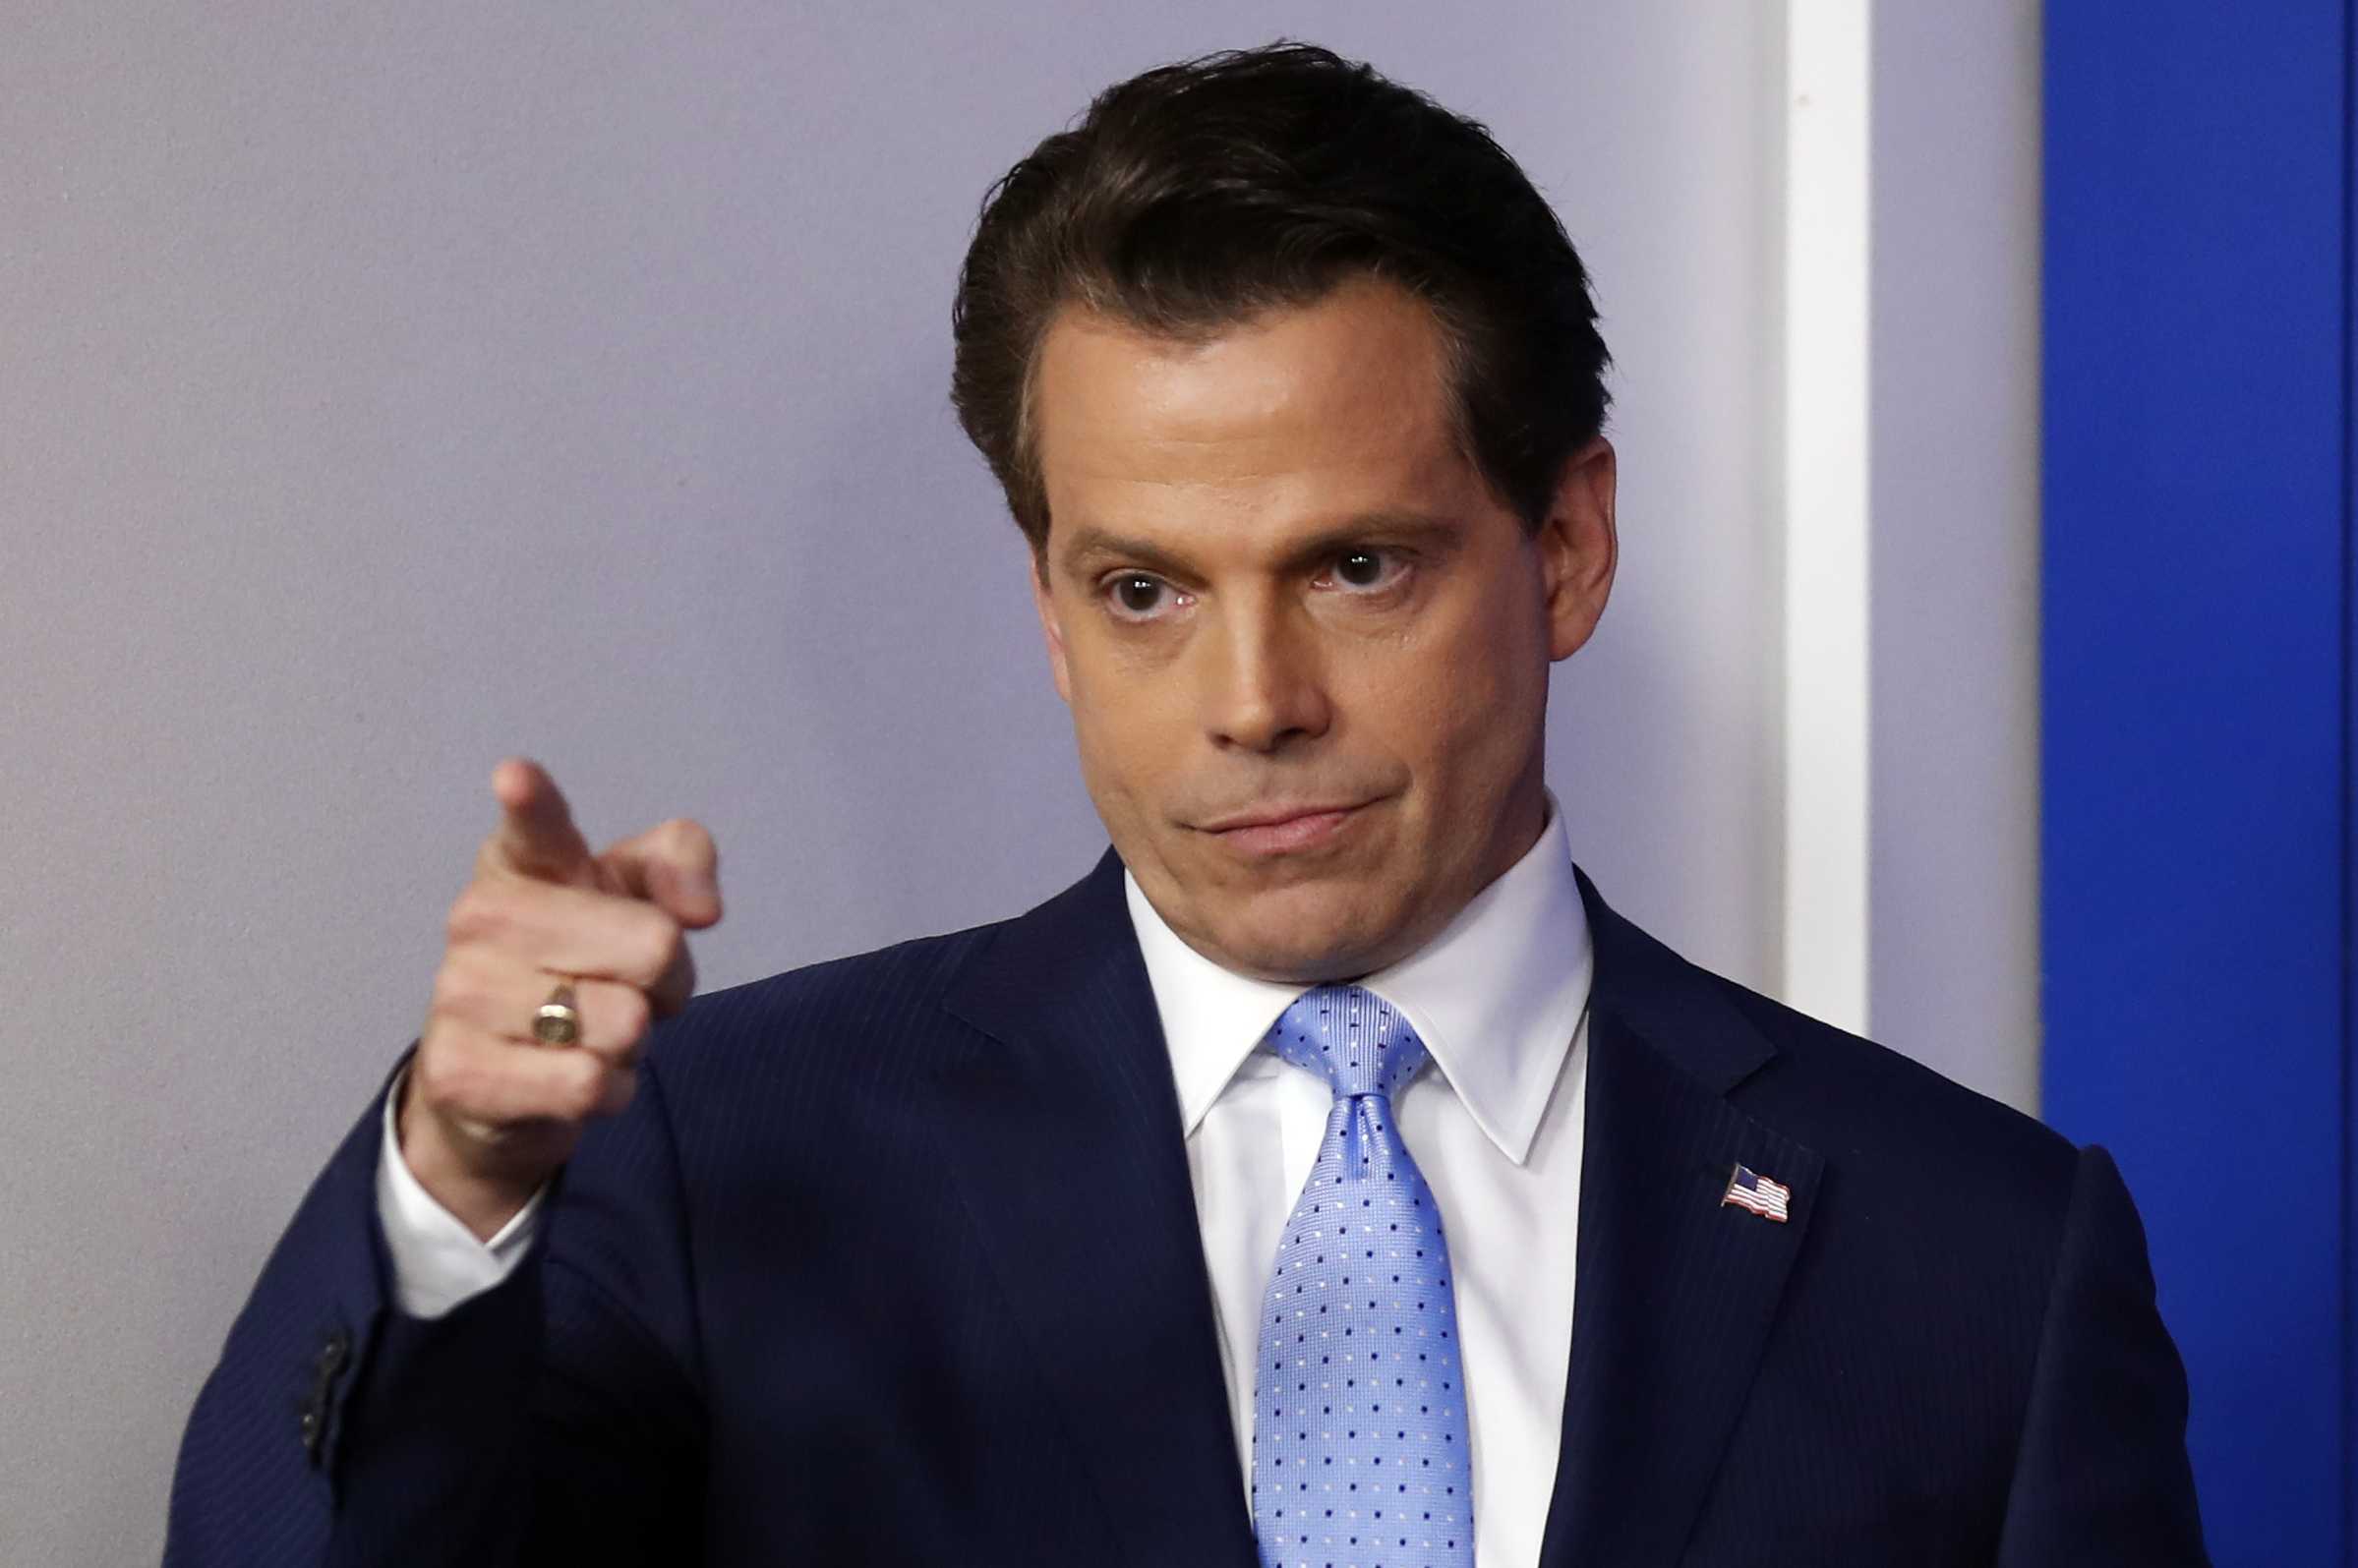 UPDATE: Anthony Scaramucci responds to Twitter backlash over Holocaust tweet